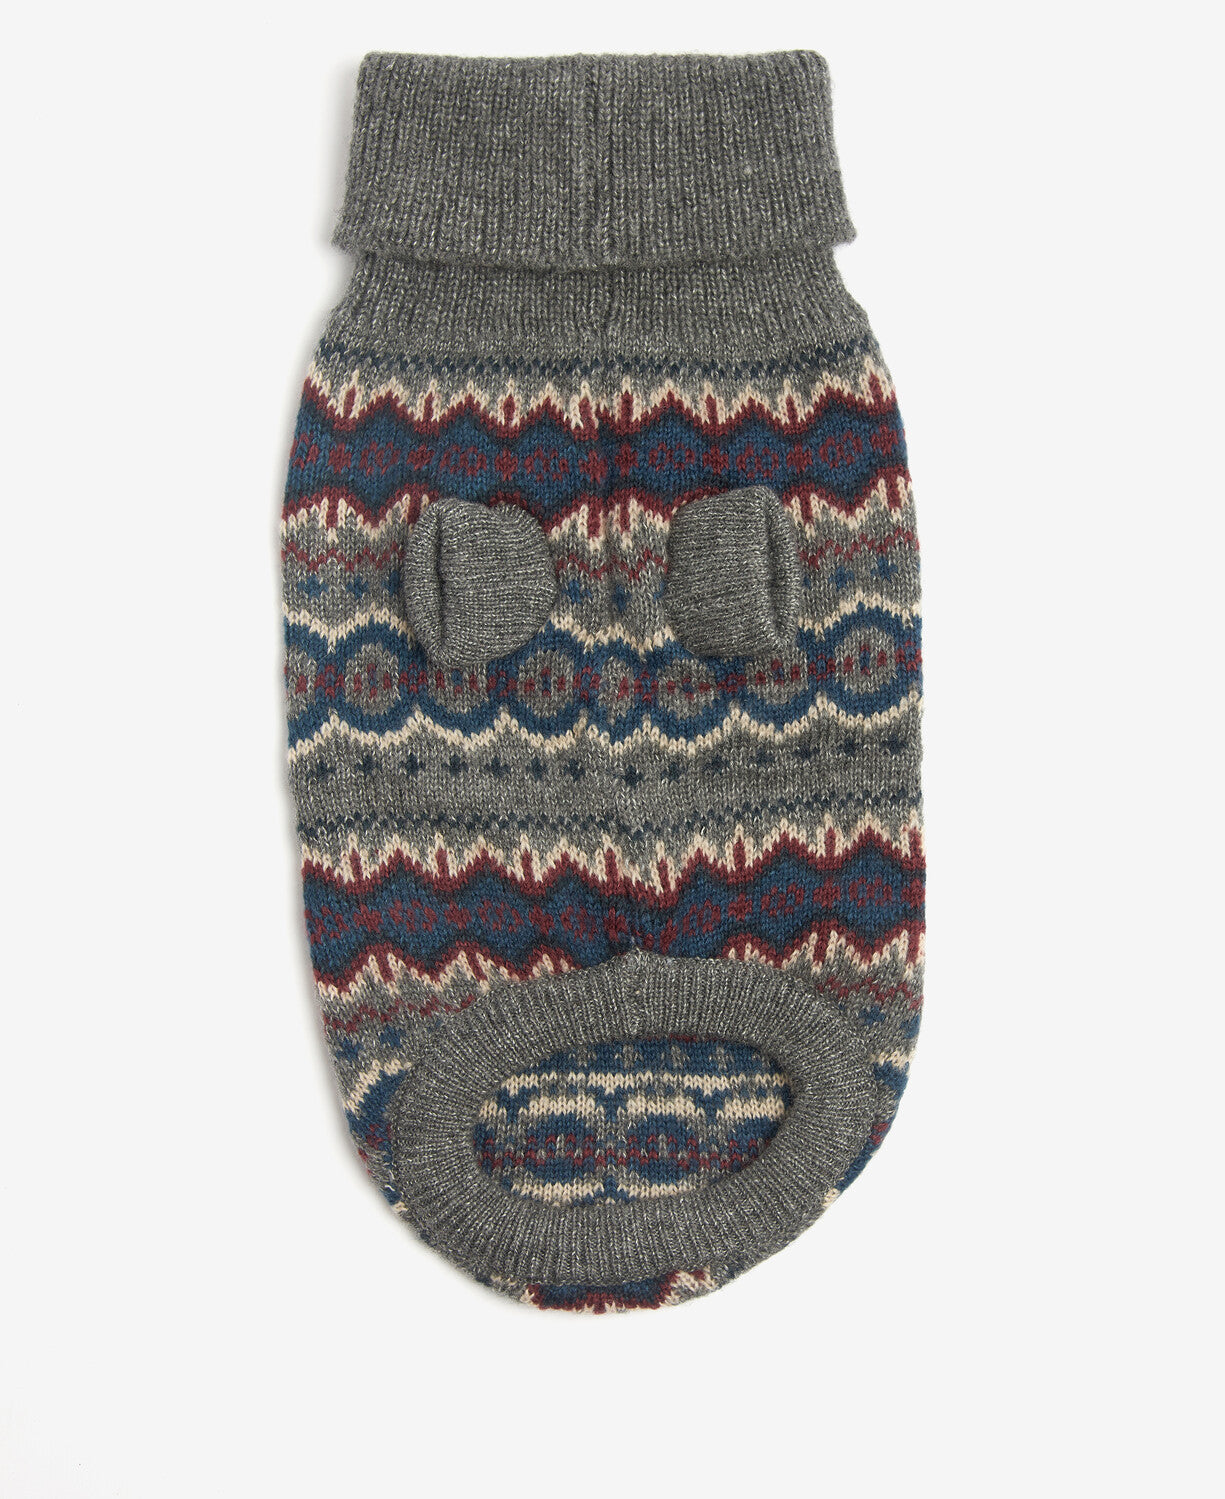 Barbour Fair Isle Knitted Dog Jumper